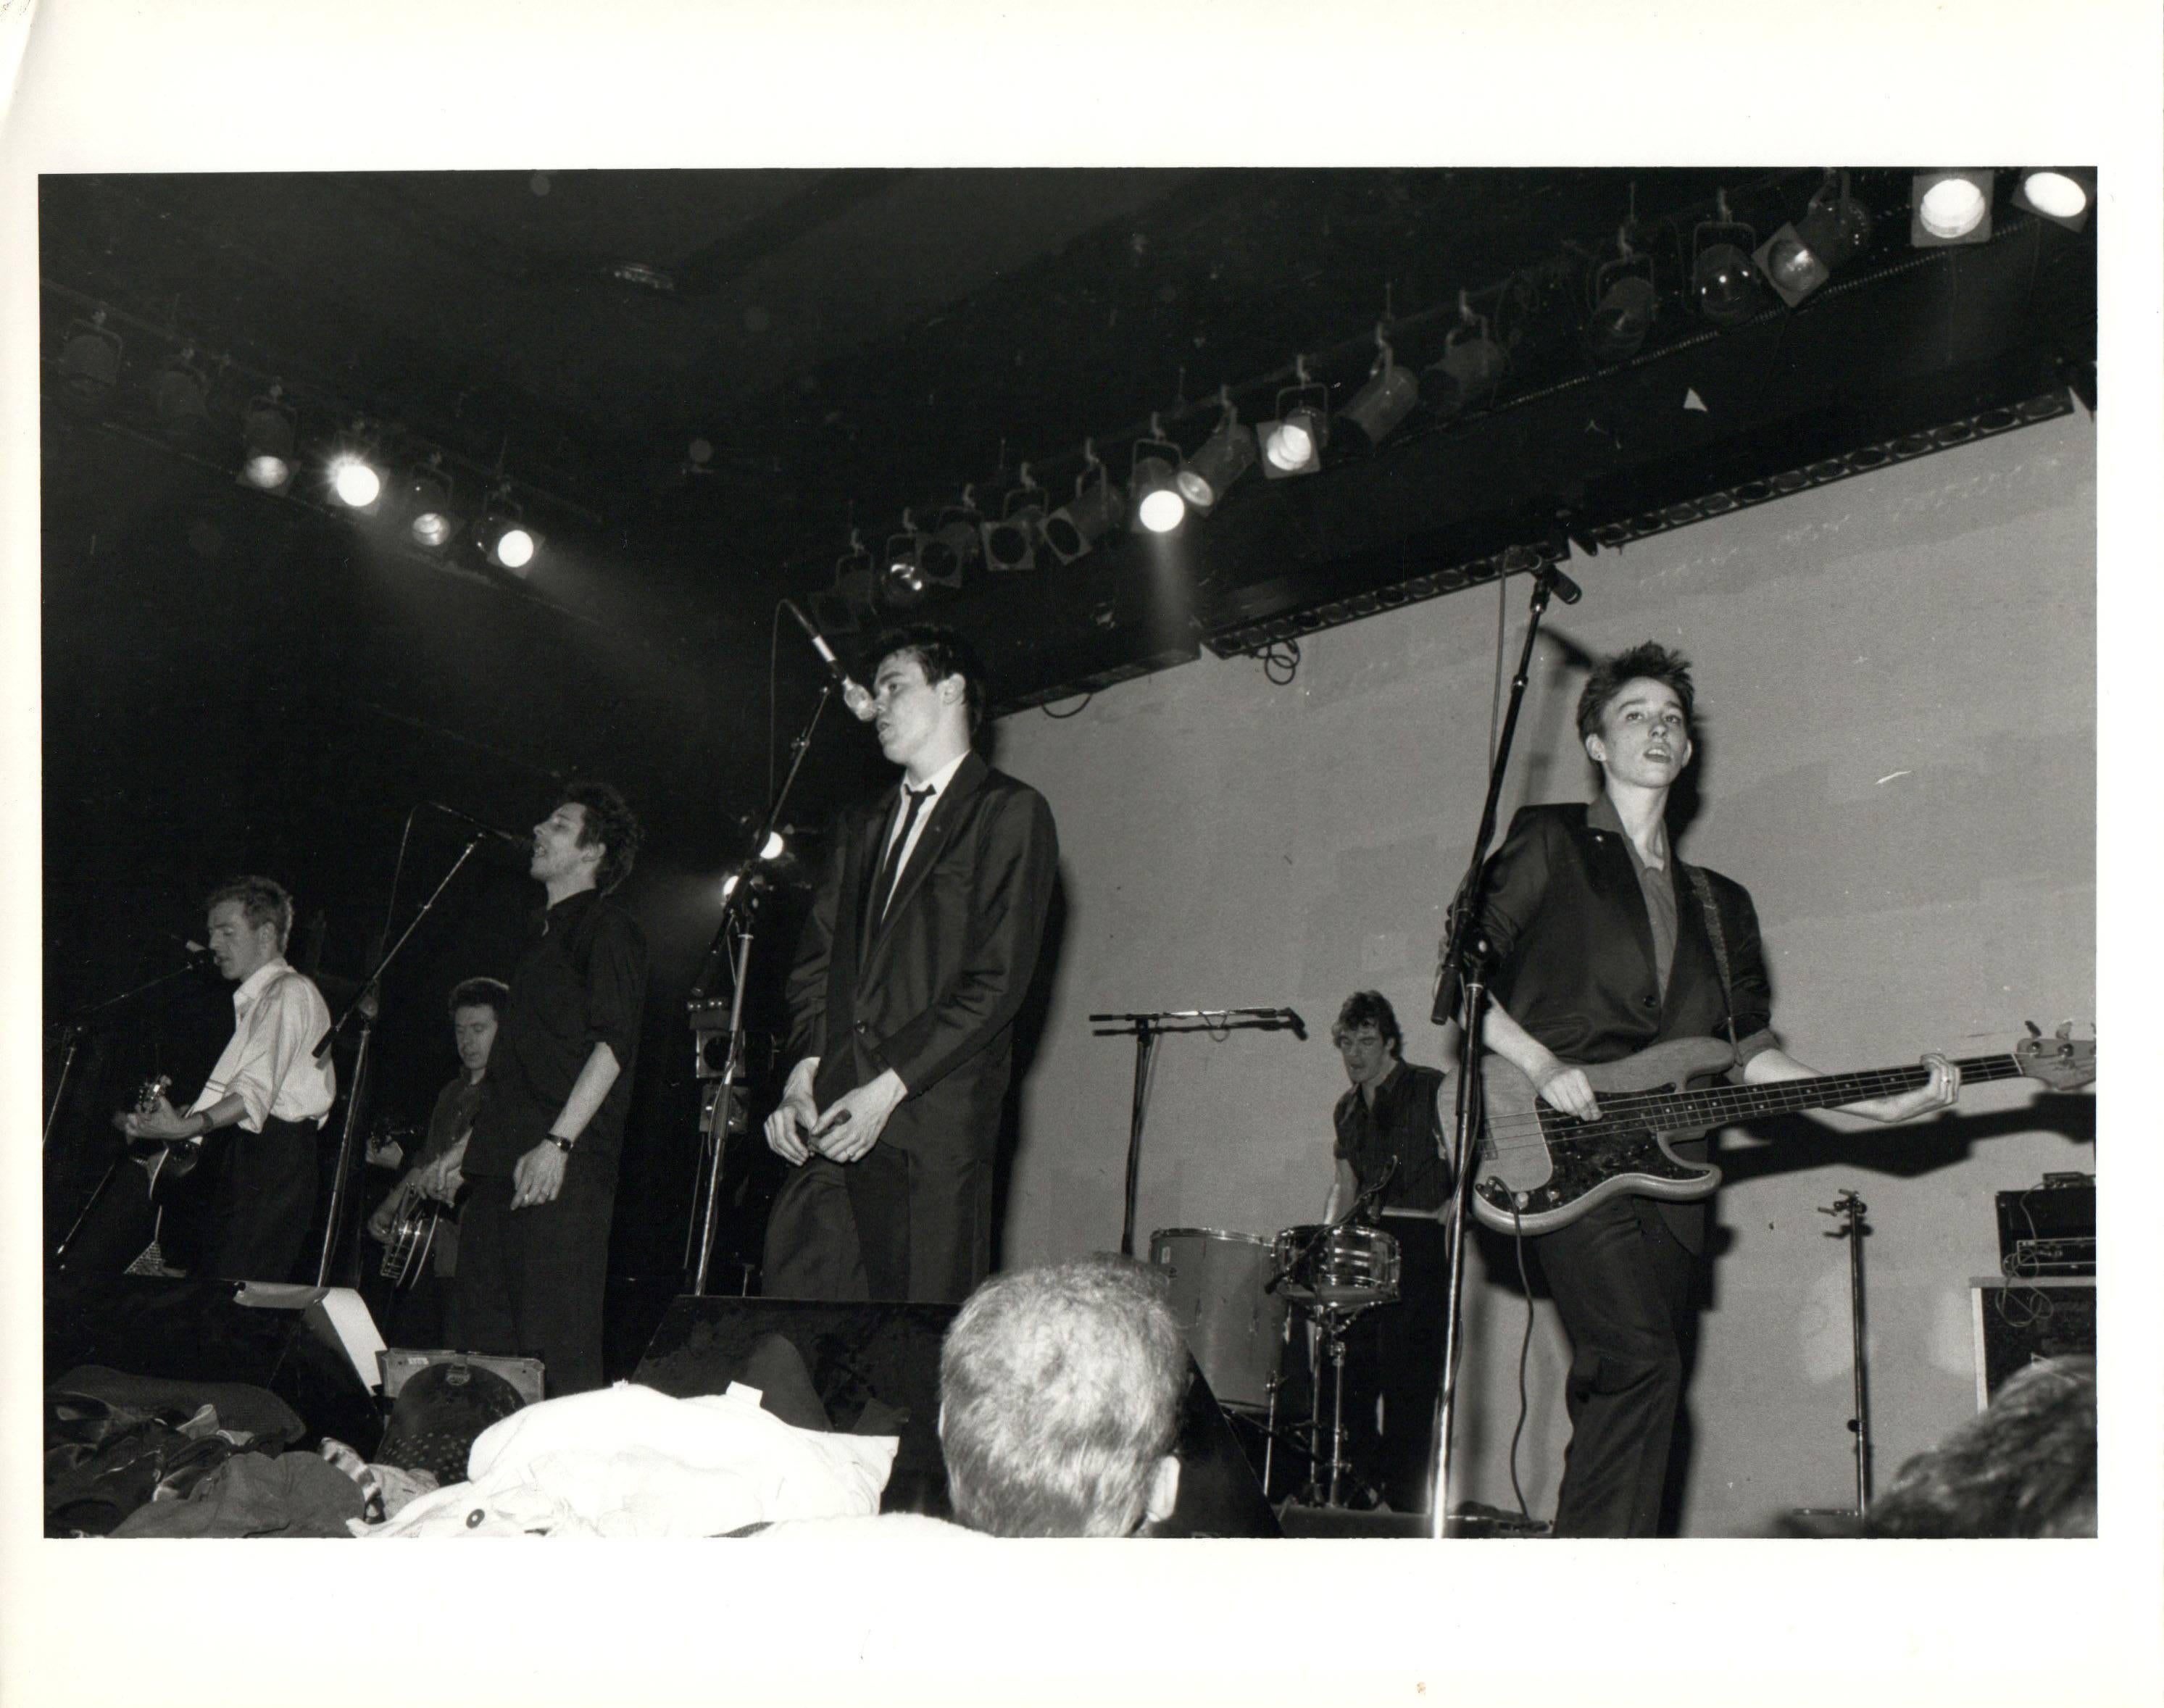 John Bellissimo Black and White Photograph - The Pogues Performing Vintage Original Photograph